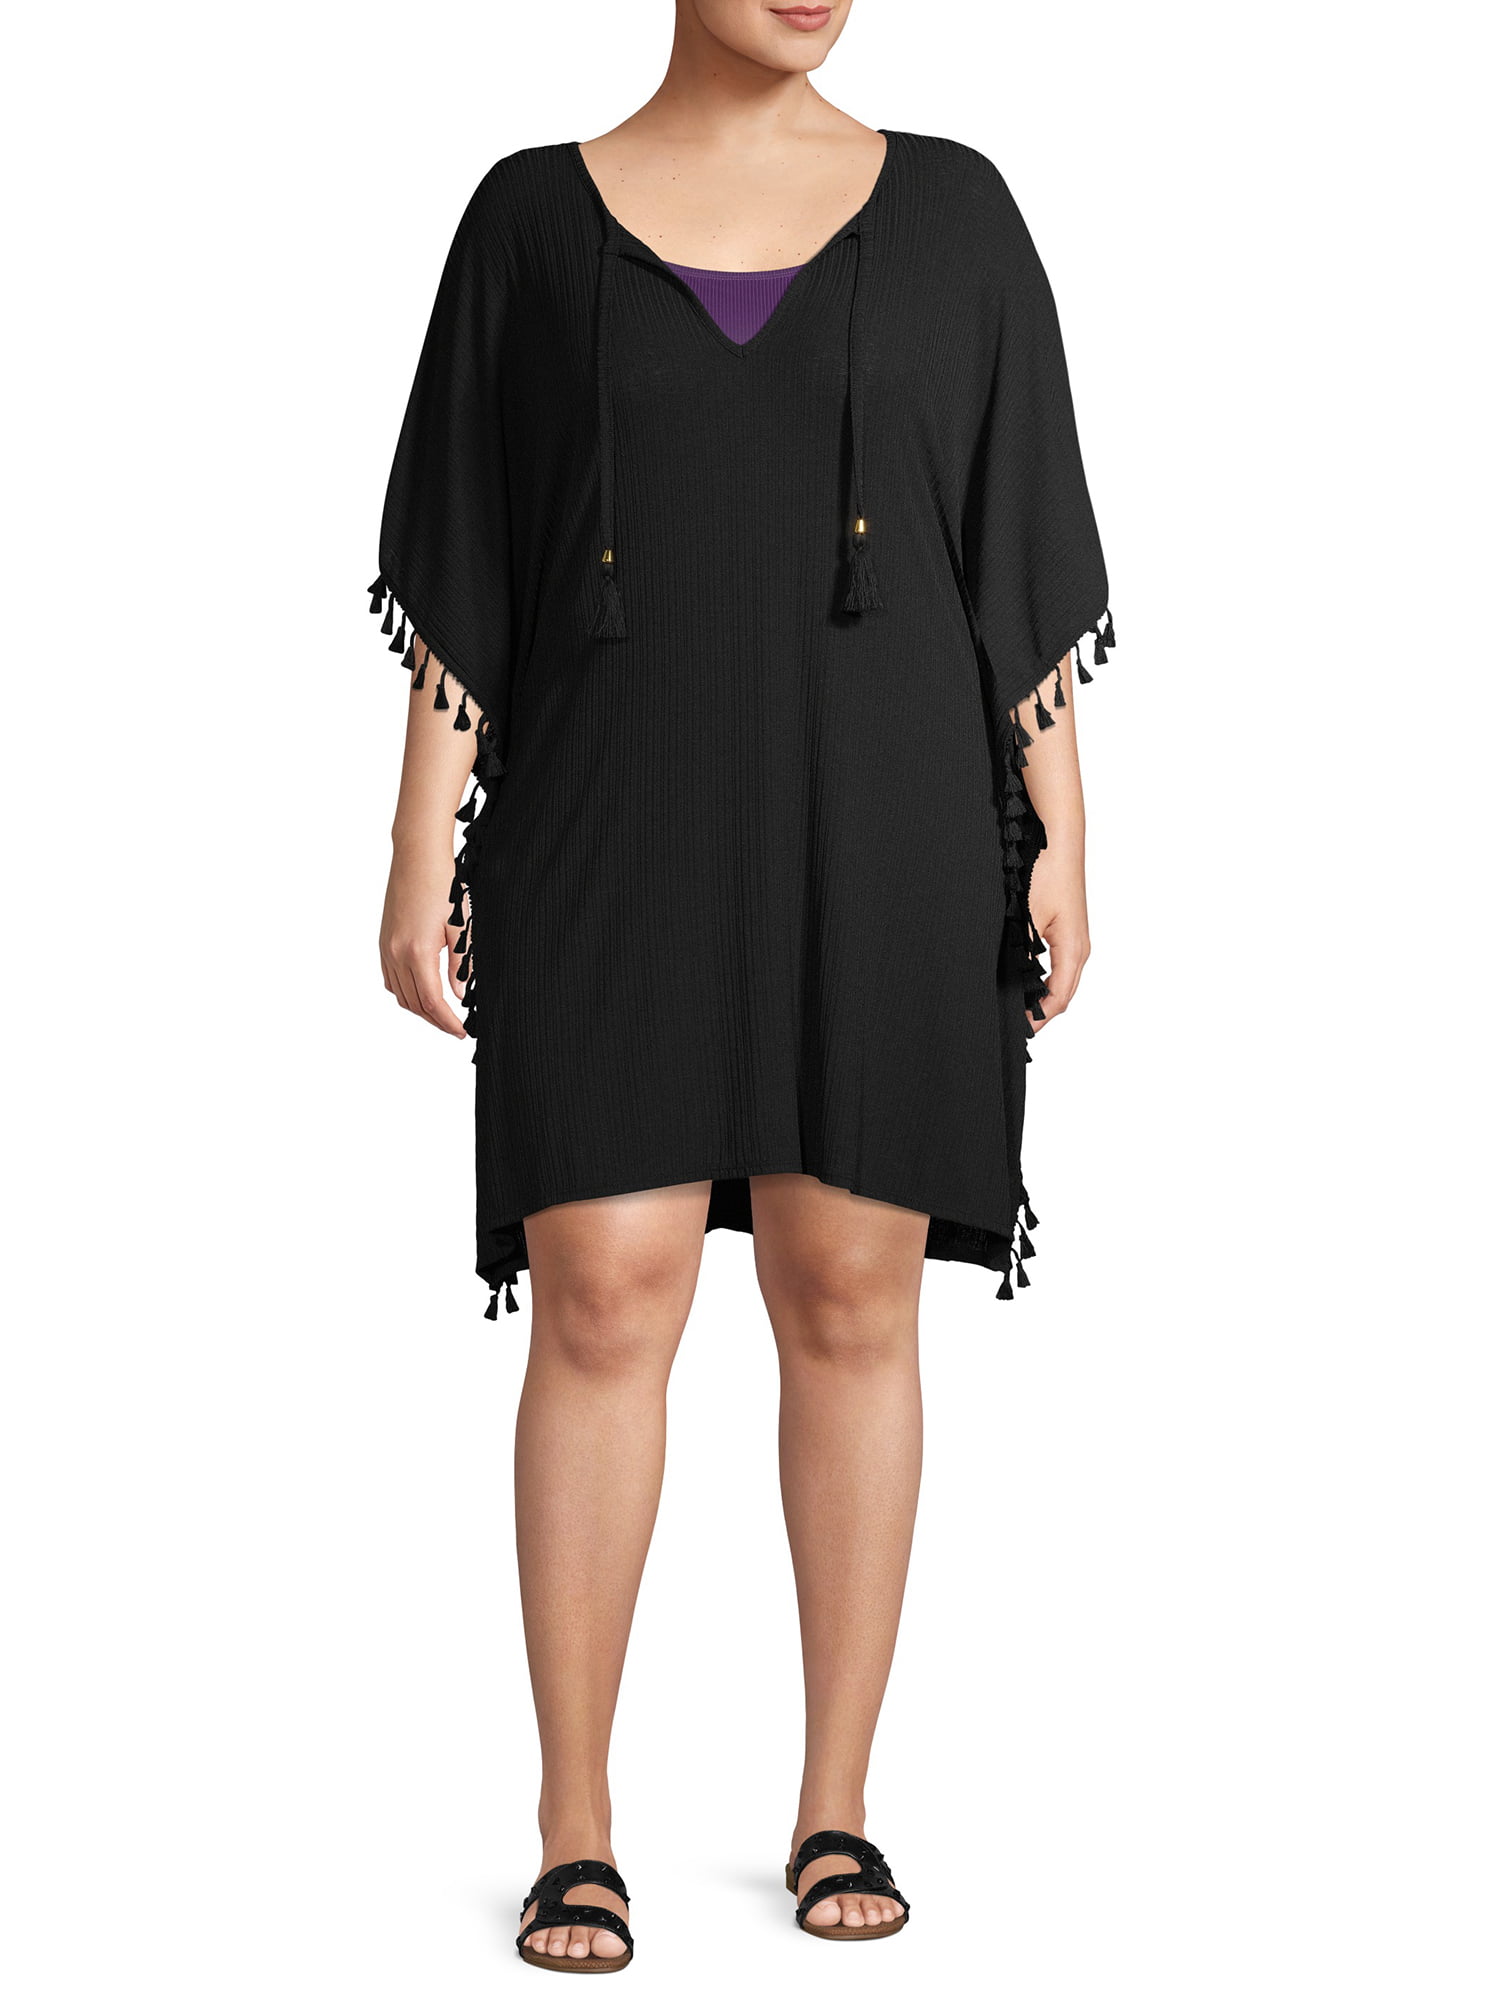 Novelty Rib Caftan Plus Size Swimsuit Cover Up 